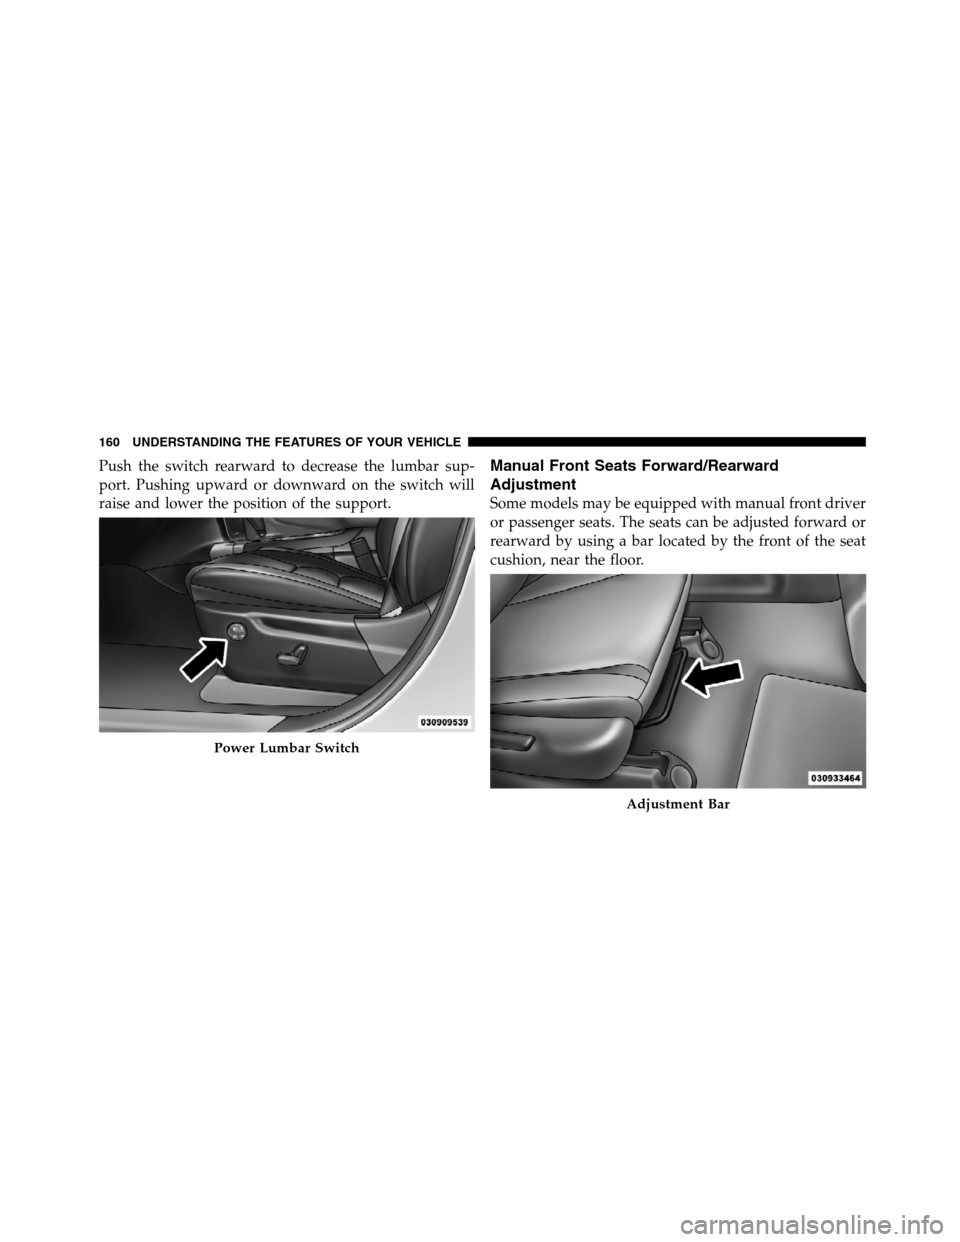 JEEP GRAND CHEROKEE 2012 WK2 / 4.G SRT Owners Manual Push the switch rearward to decrease the lumbar sup-
port. Pushing upward or downward on the switch will
raise and lower the position of the support.Manual Front Seats Forward/Rearward
Adjustment
Some